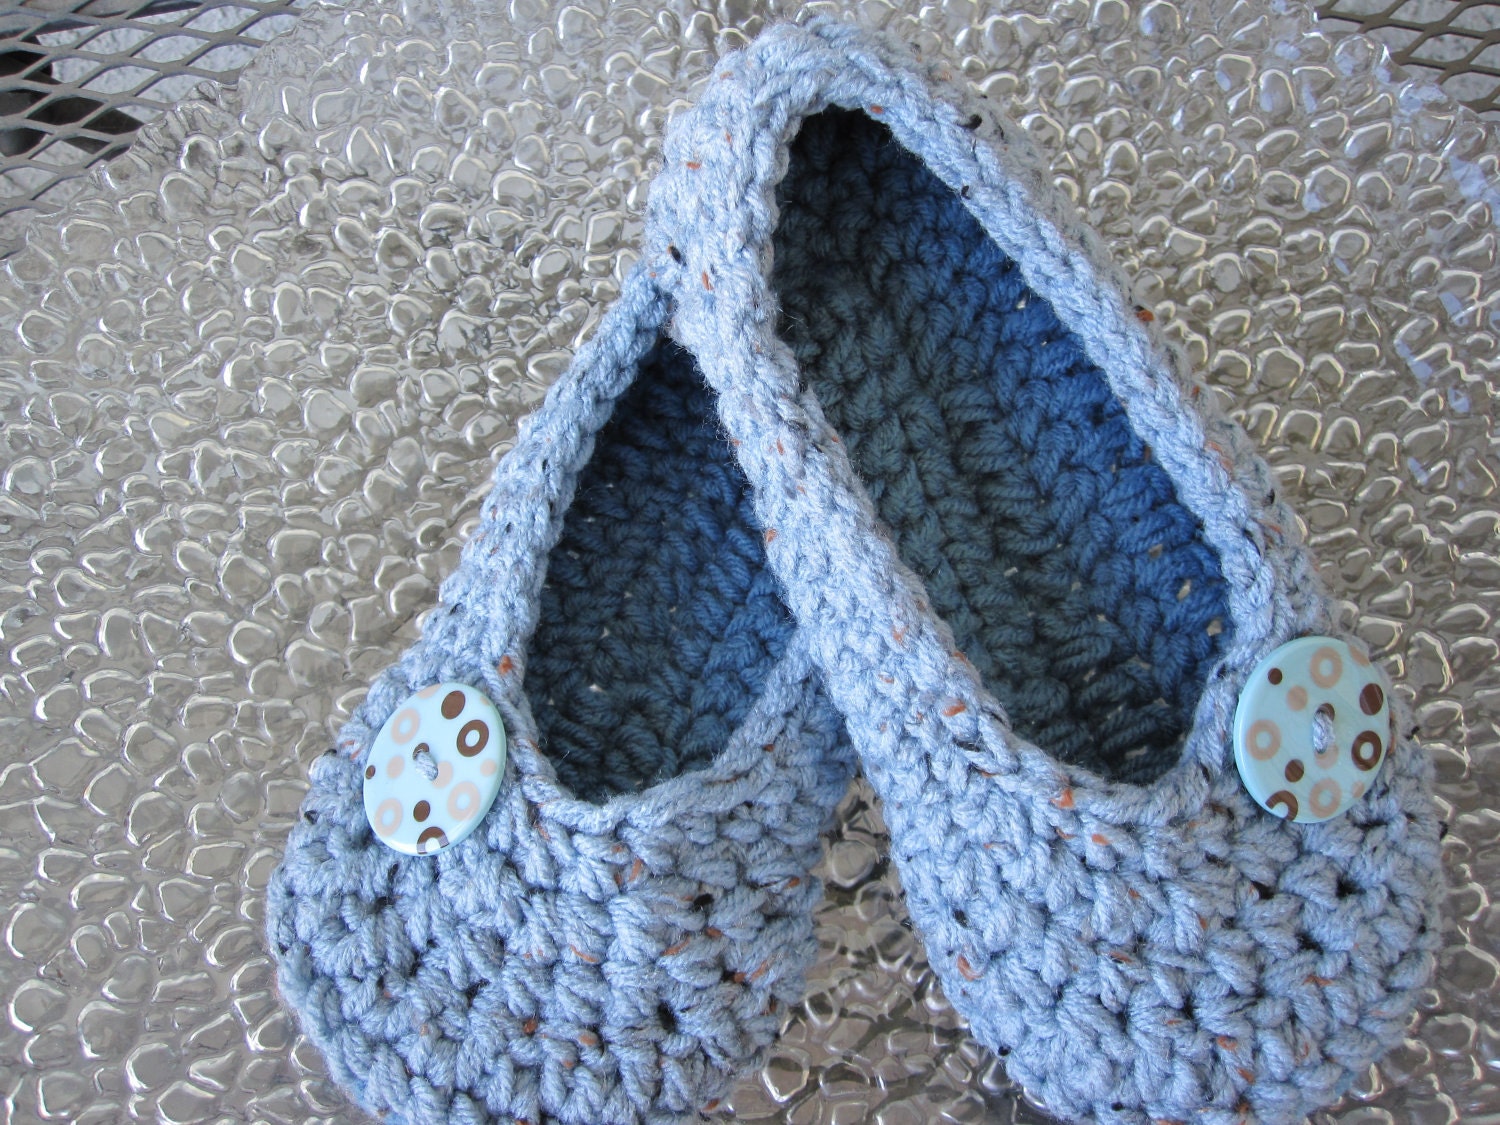 Crochet Womens Slippers - Blue Flecks and Country Blue - Size 3-12